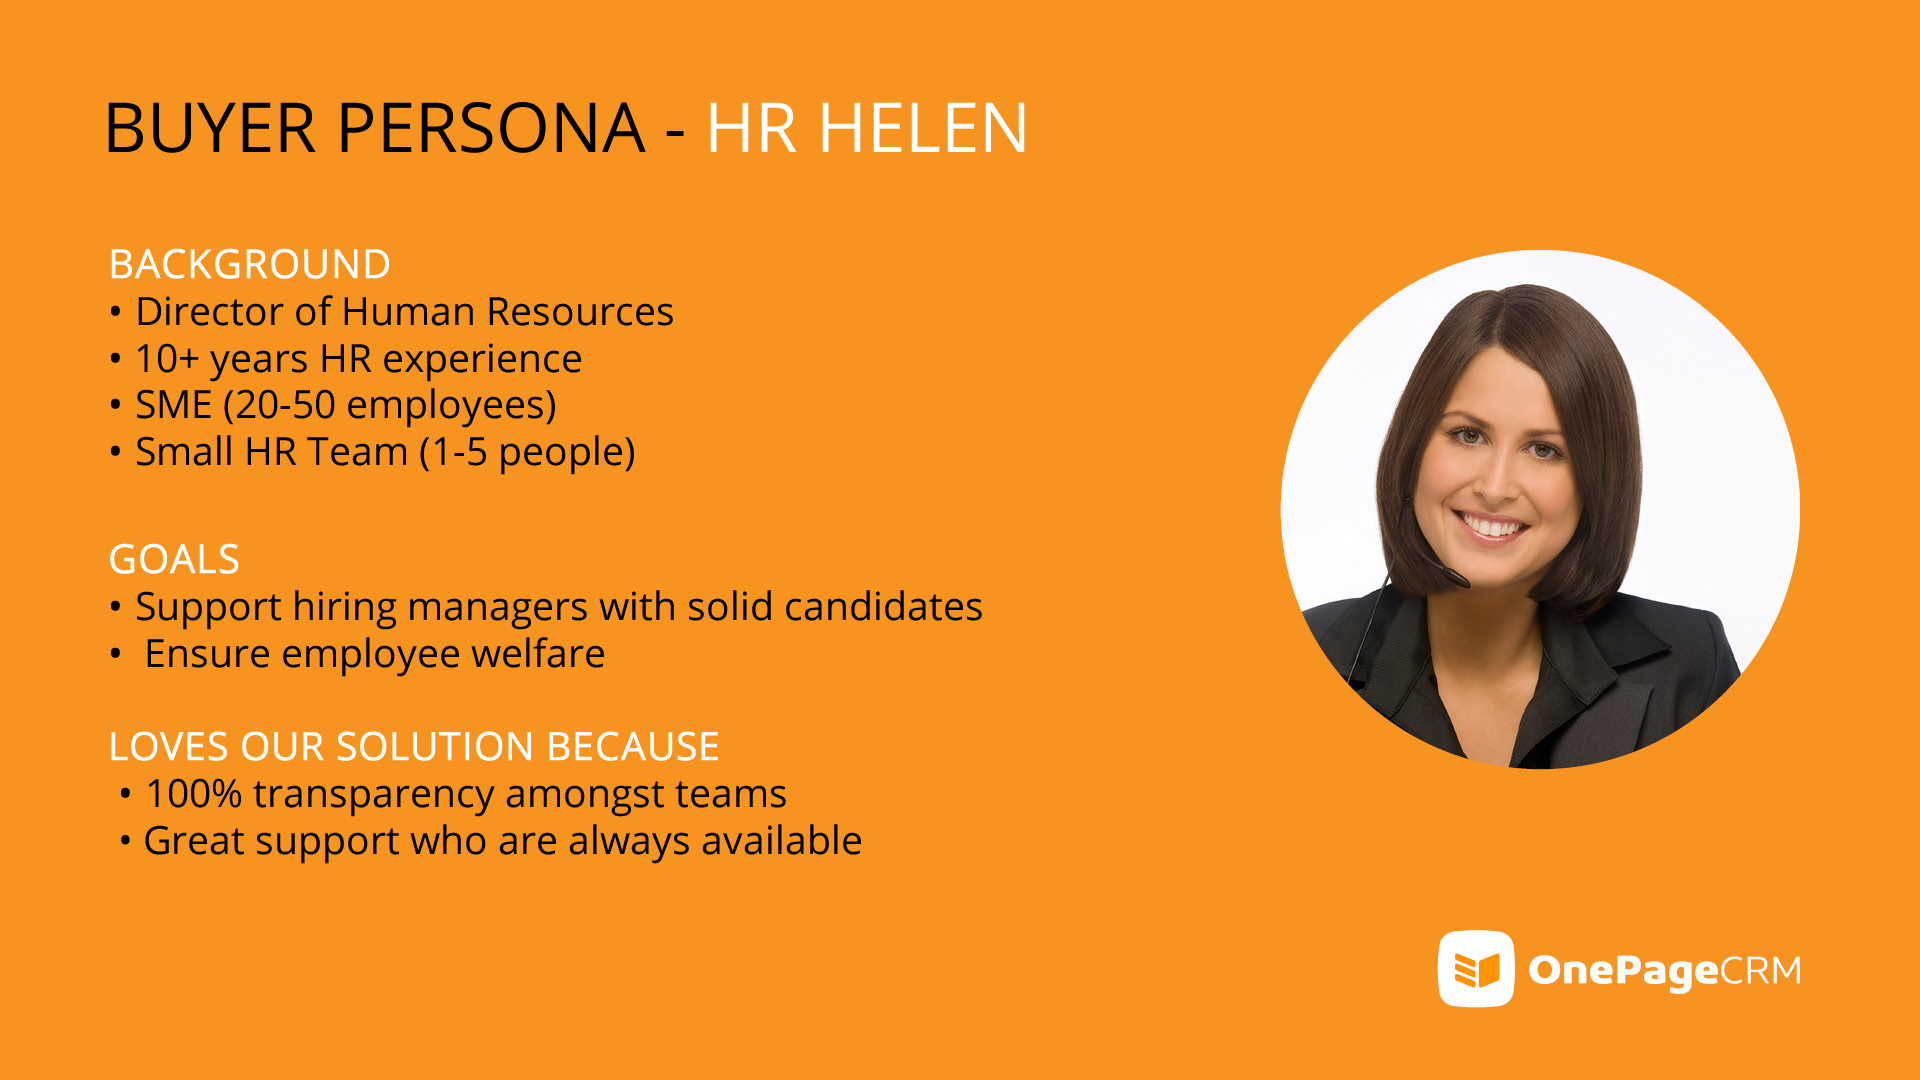 Buyer persona example: Helen is HR Director who's looking to support hiring managers with solid candidates